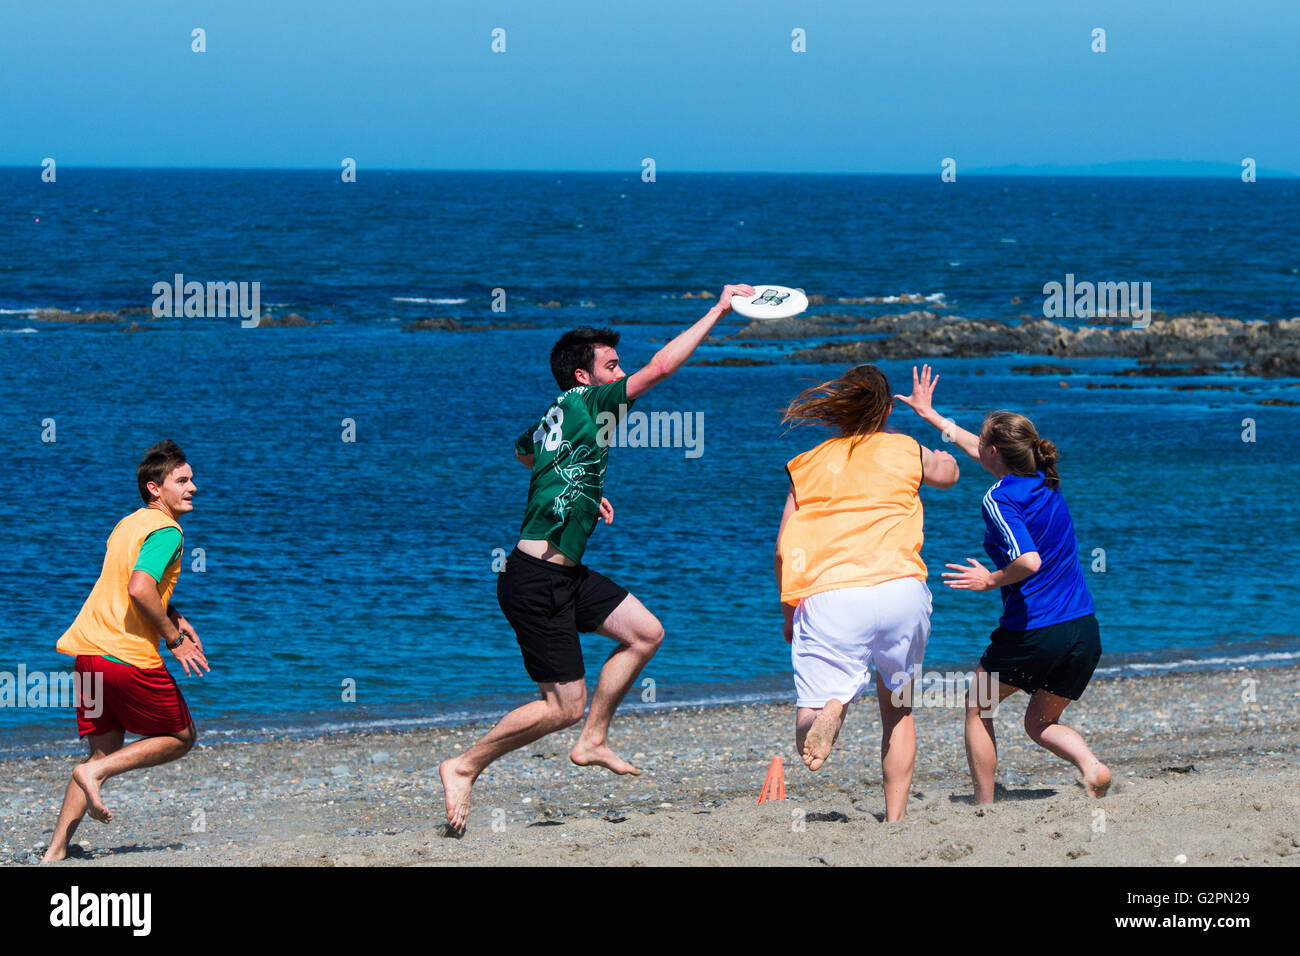 Aberystwyth Wales UK, Thursday 02 June 2016  UK weather: On the second ‘official’ day of summer students from Aberystwyth University 'Ultimate Frisbee' club  enjoy a morning of clear blue skies and warm sunny weather on the beach  on the Cardigan Bay coast of West Wales.   In contrast to the overcast and damp conditions in the east of the country, the temperature in Wales and the west country is expected to reach the low 20’s  centigrade.  photo Credit:  Keith Morris / Alamy Live News Stock Photo